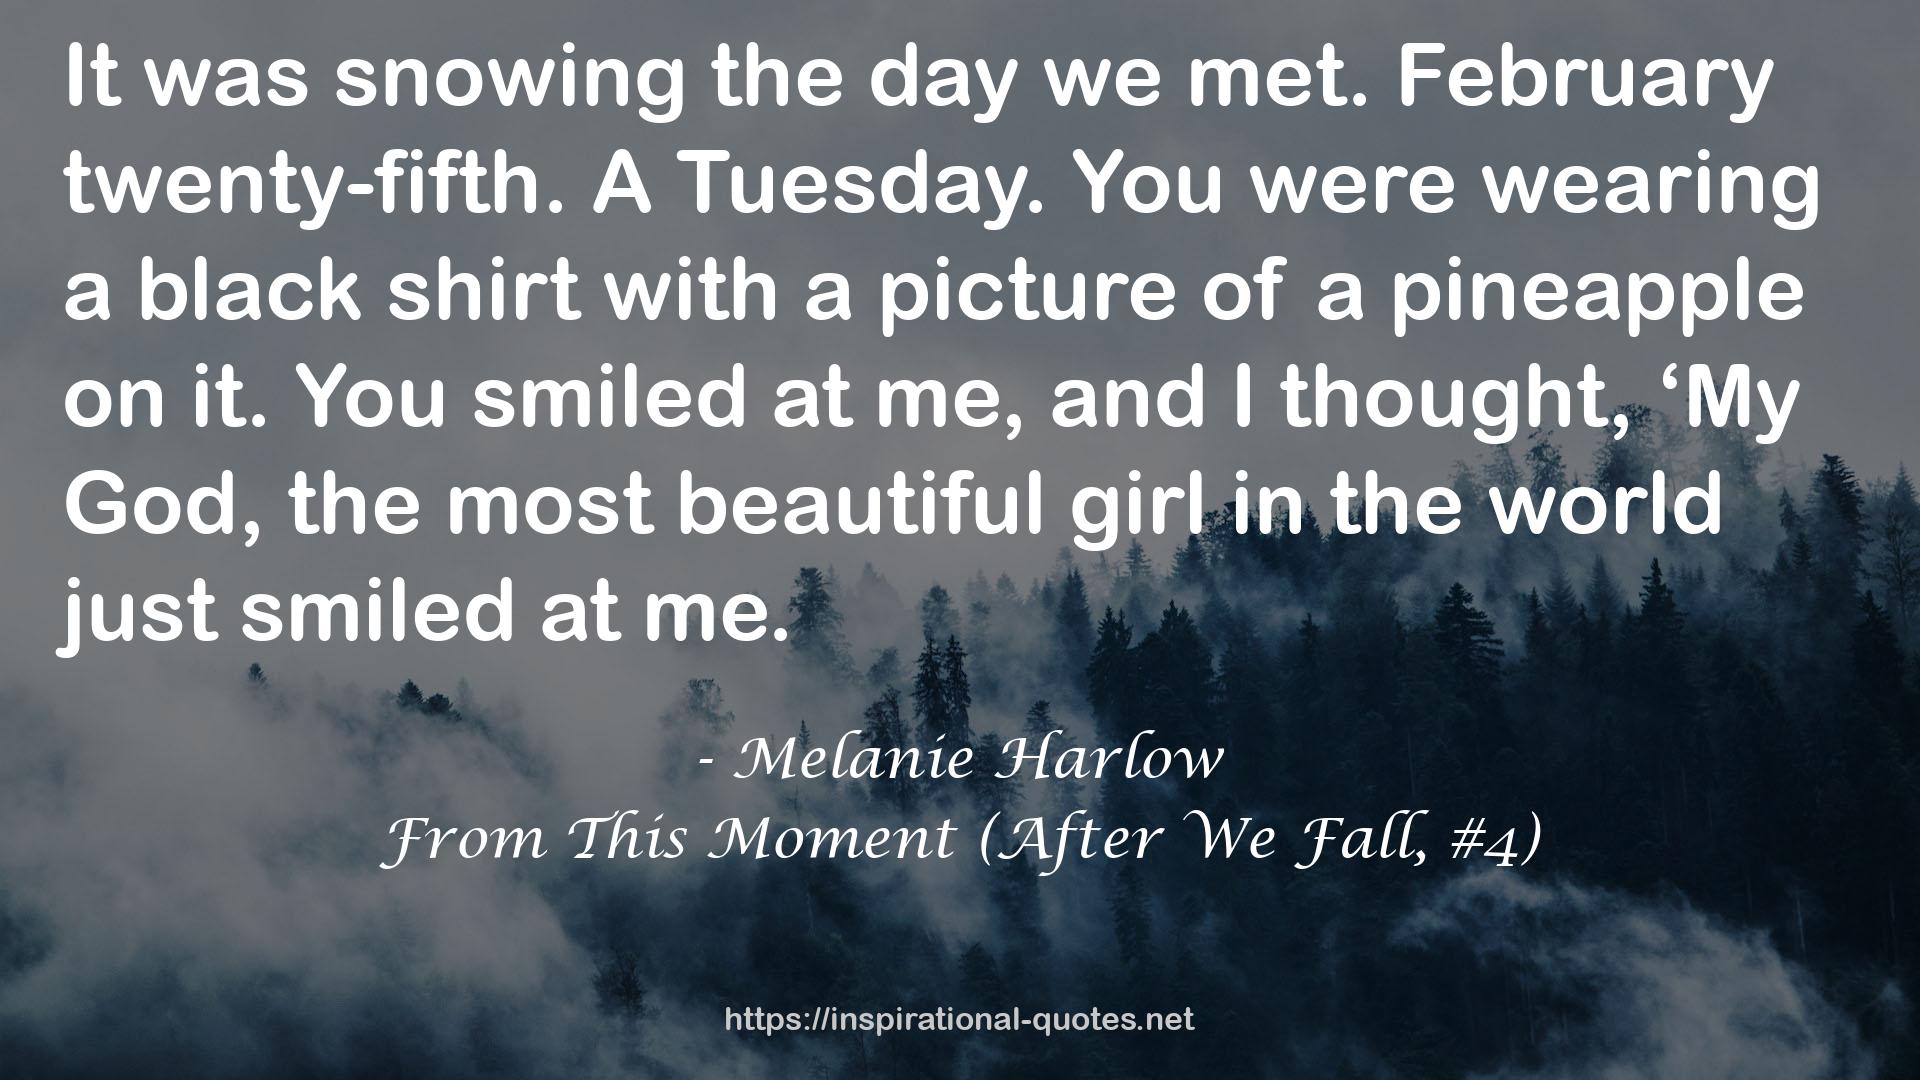 From This Moment (After We Fall, #4) QUOTES